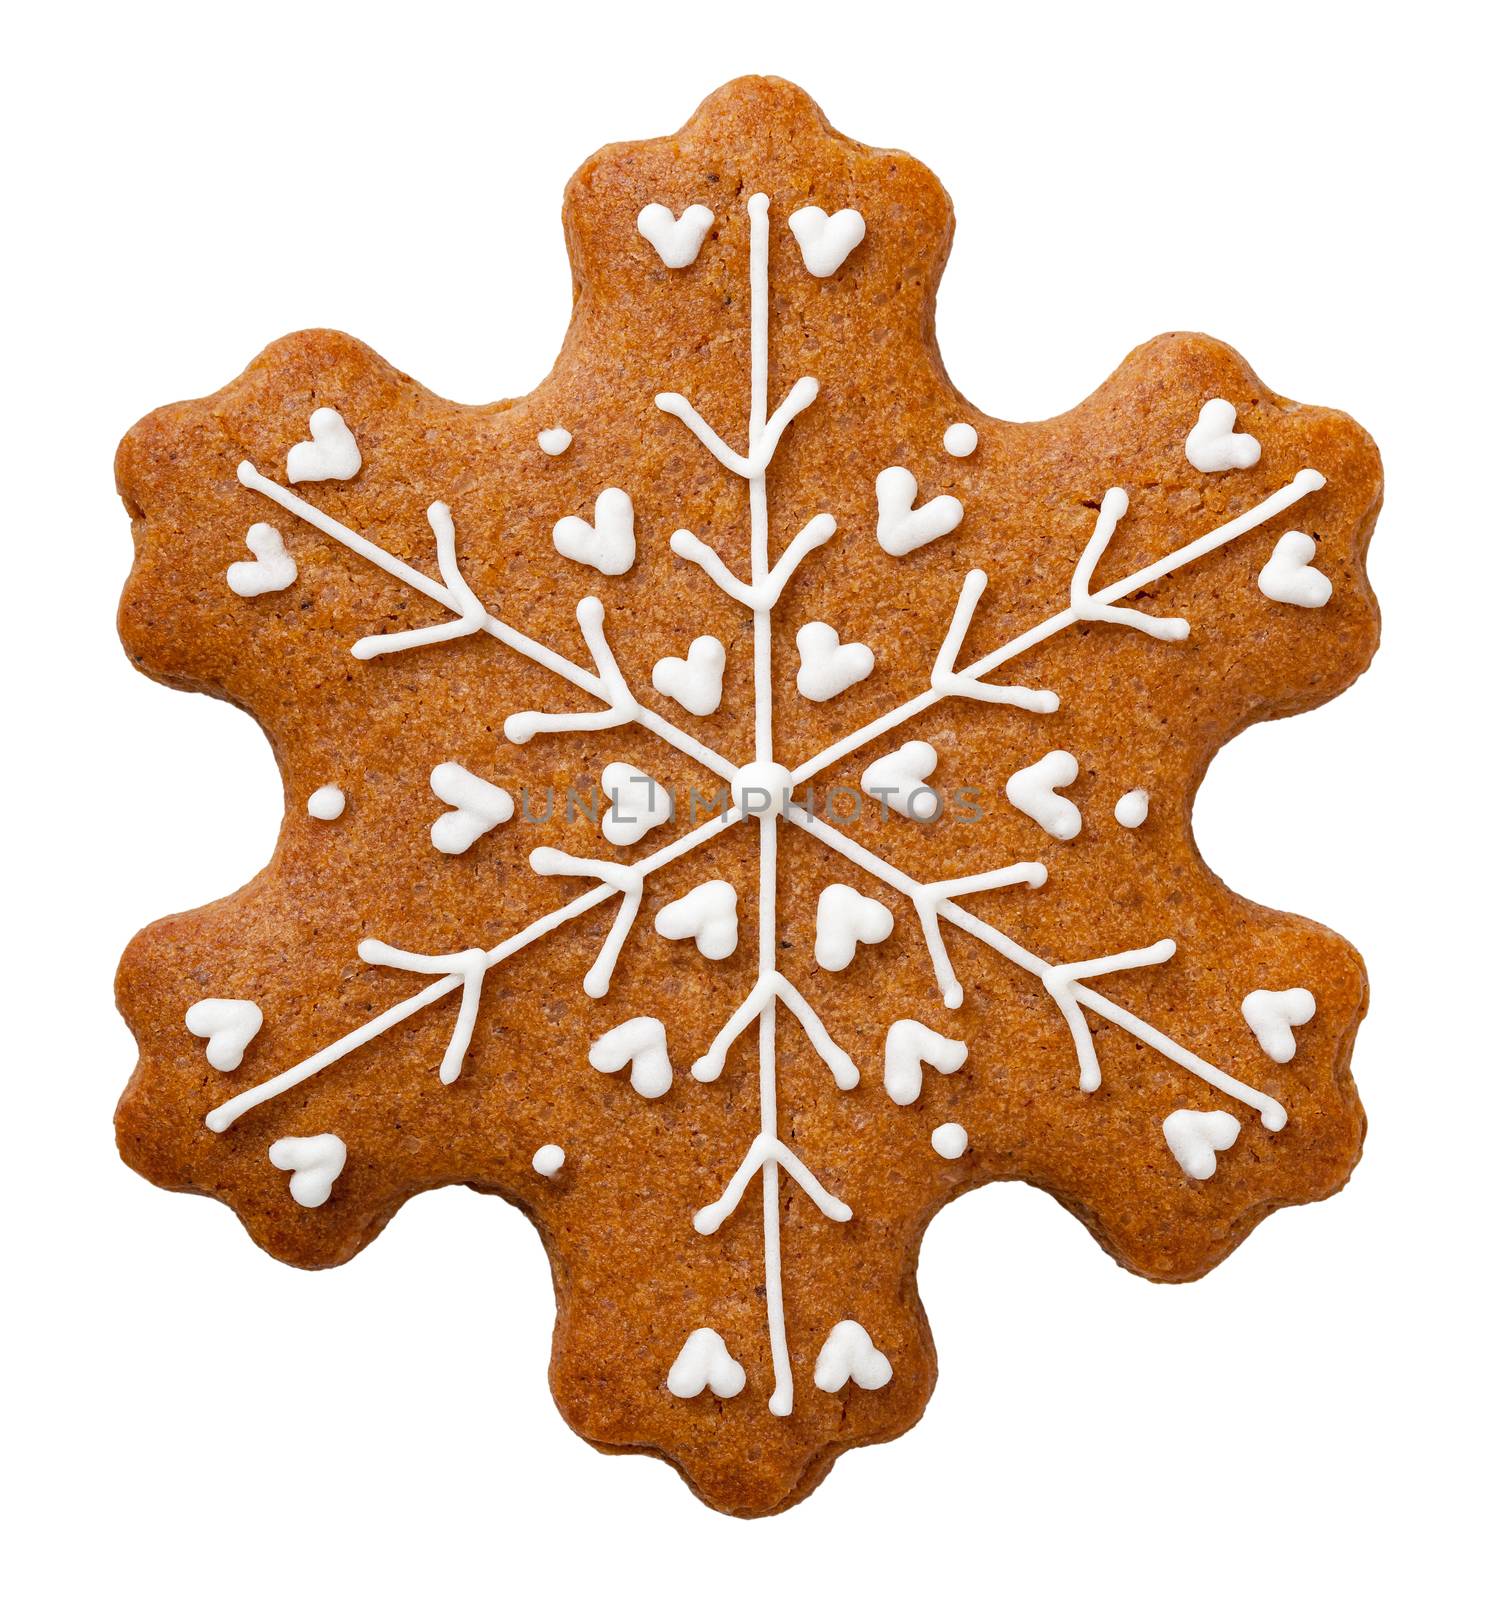 Gingerbread cookie for Christmas isolated on white background. Star shape cookie